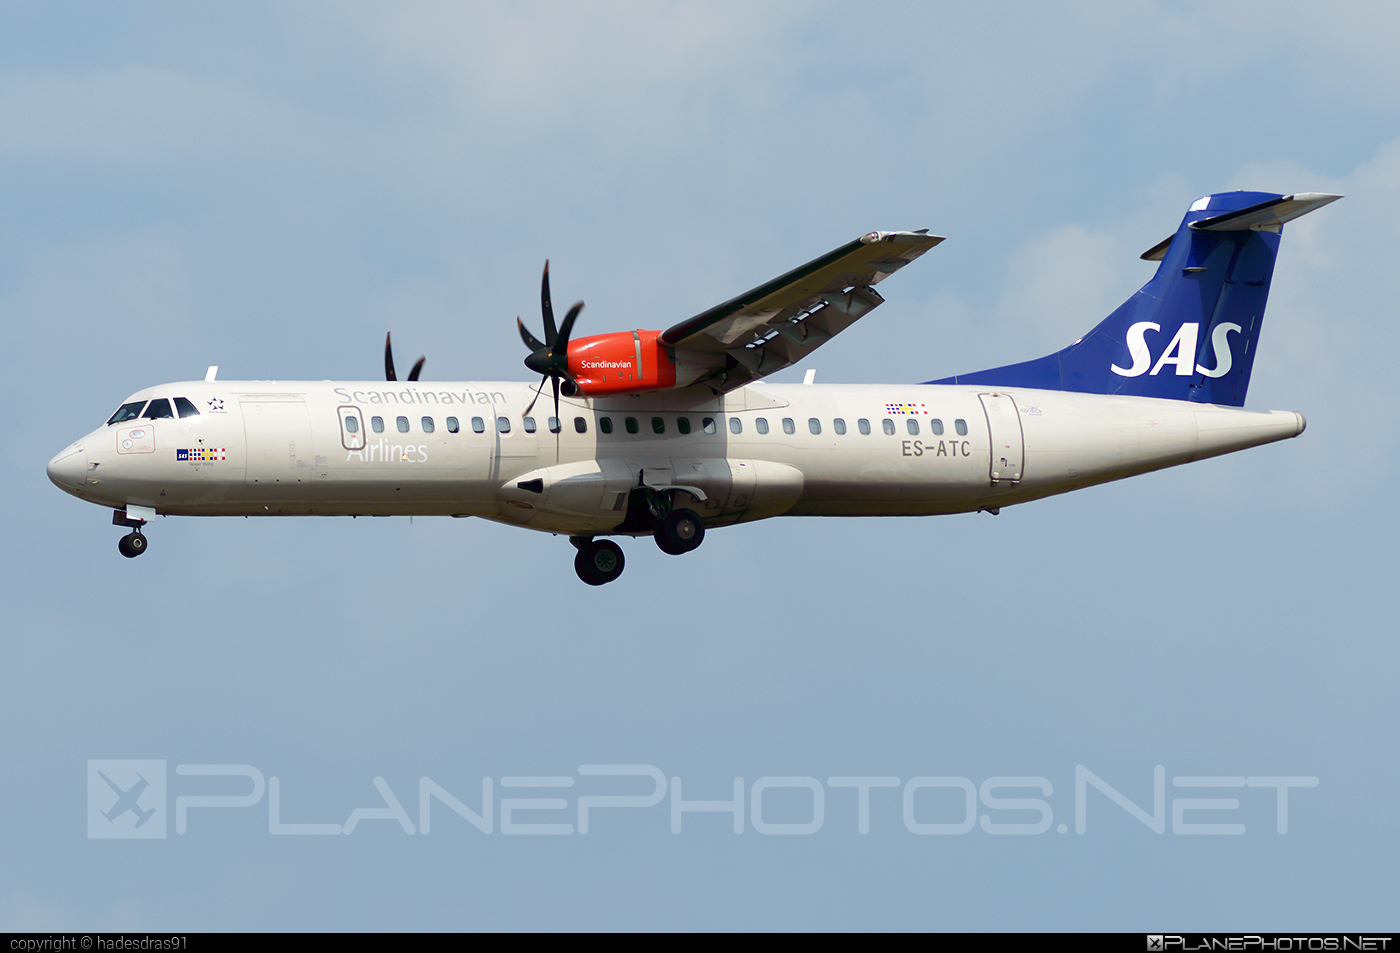 ATR 72-600 - ES-ATC operated by Scandinavian Airlines (SAS) #atr #atr72 #atr72600 #sas #sasairlines #scandinavianairlines